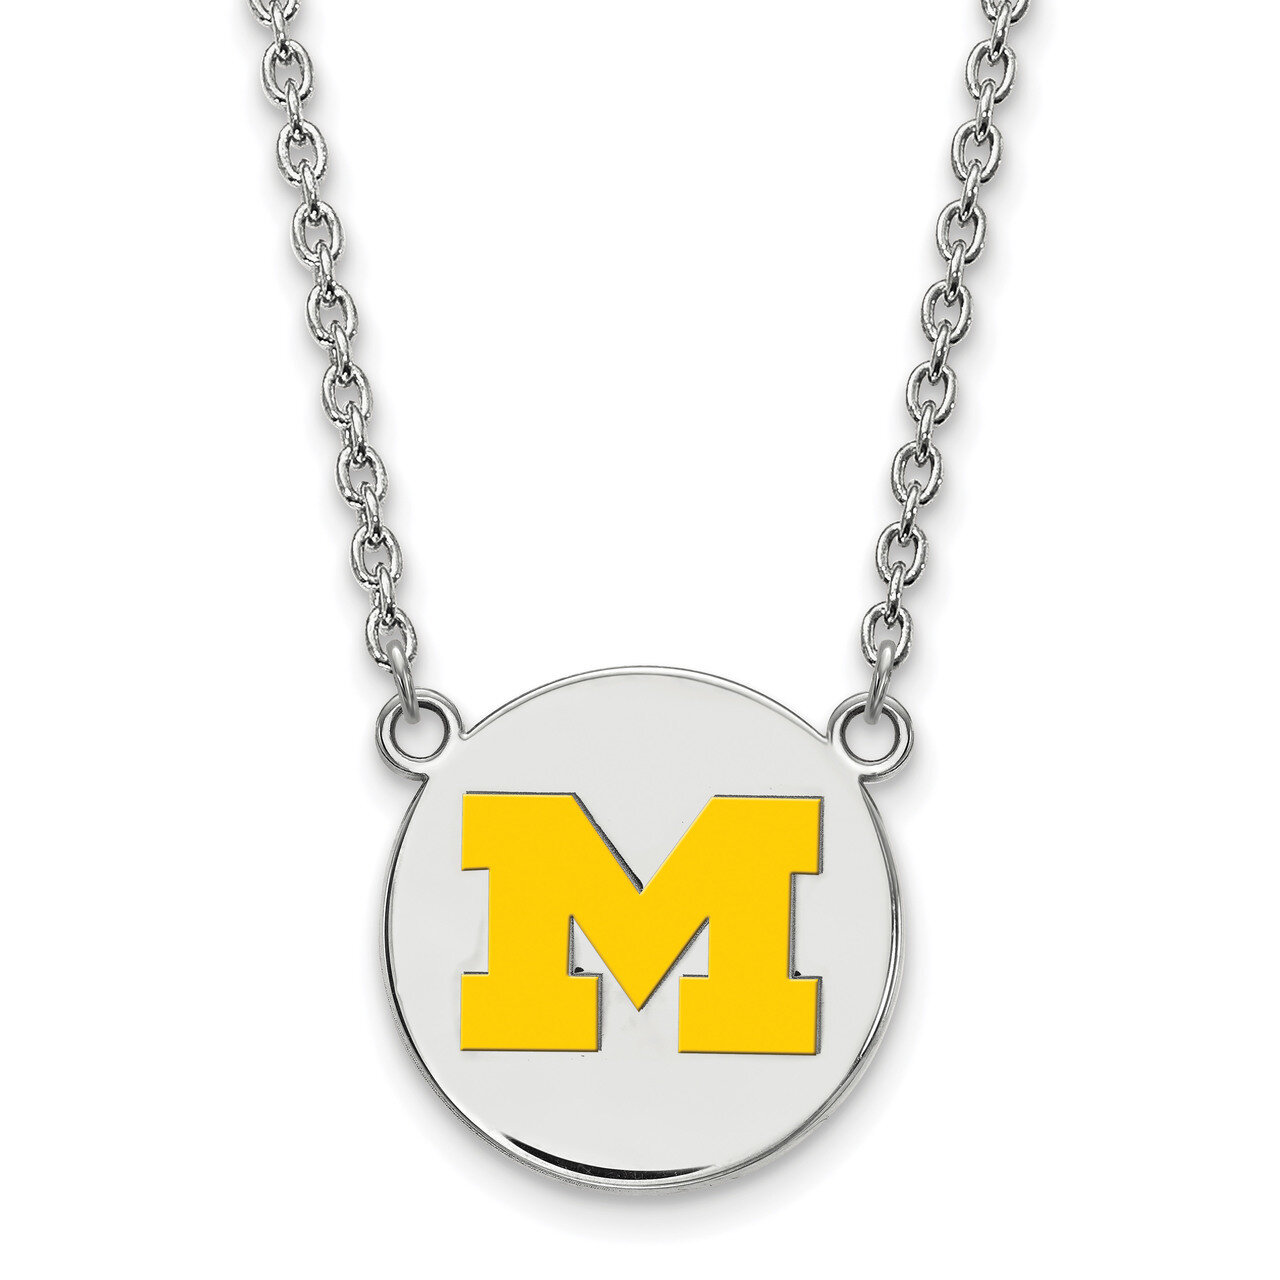 Michigan University of Lg Yellow Enl Disc Pend with Necklace Sterling Silver SS041UM-18